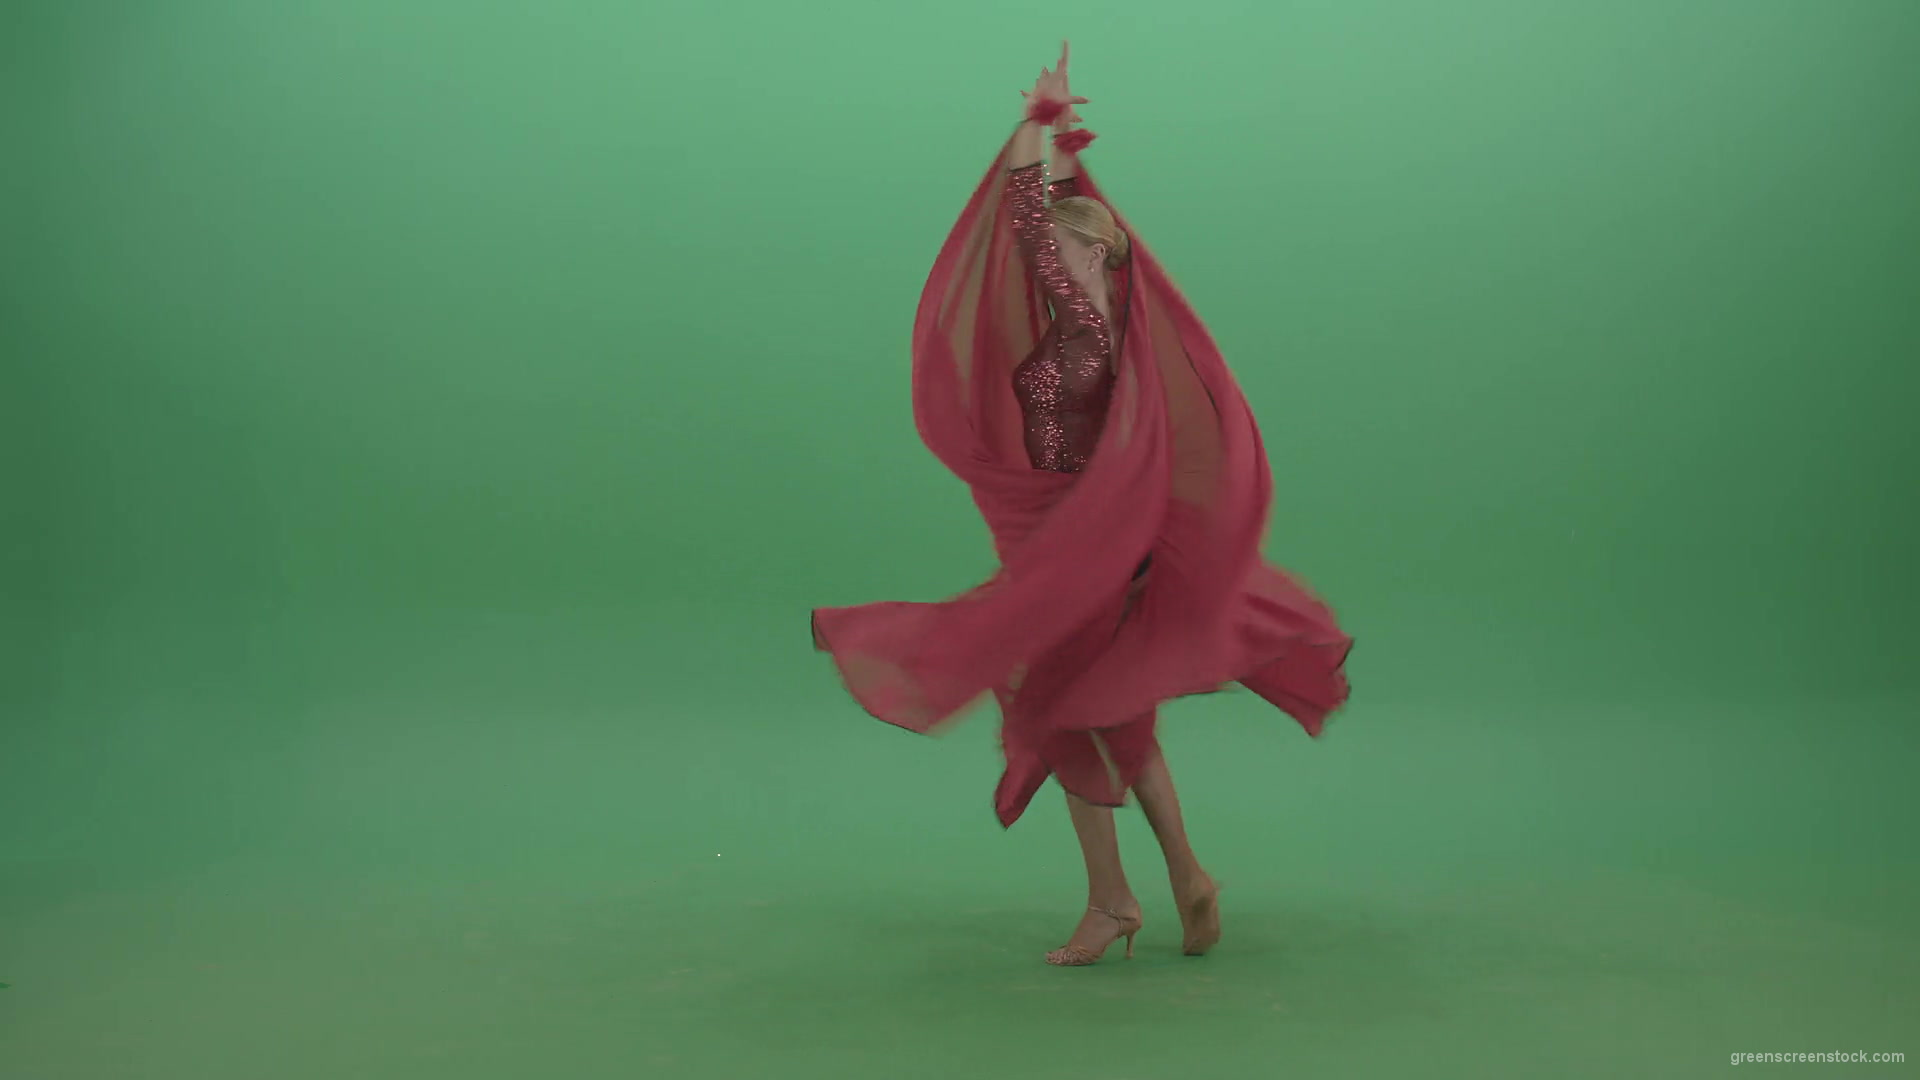 Passion-elegant-girl-in-red-dress-dancing-flamenco-isolated-on-green-screen-4K-Video-Footage-1920_007 Green Screen Stock